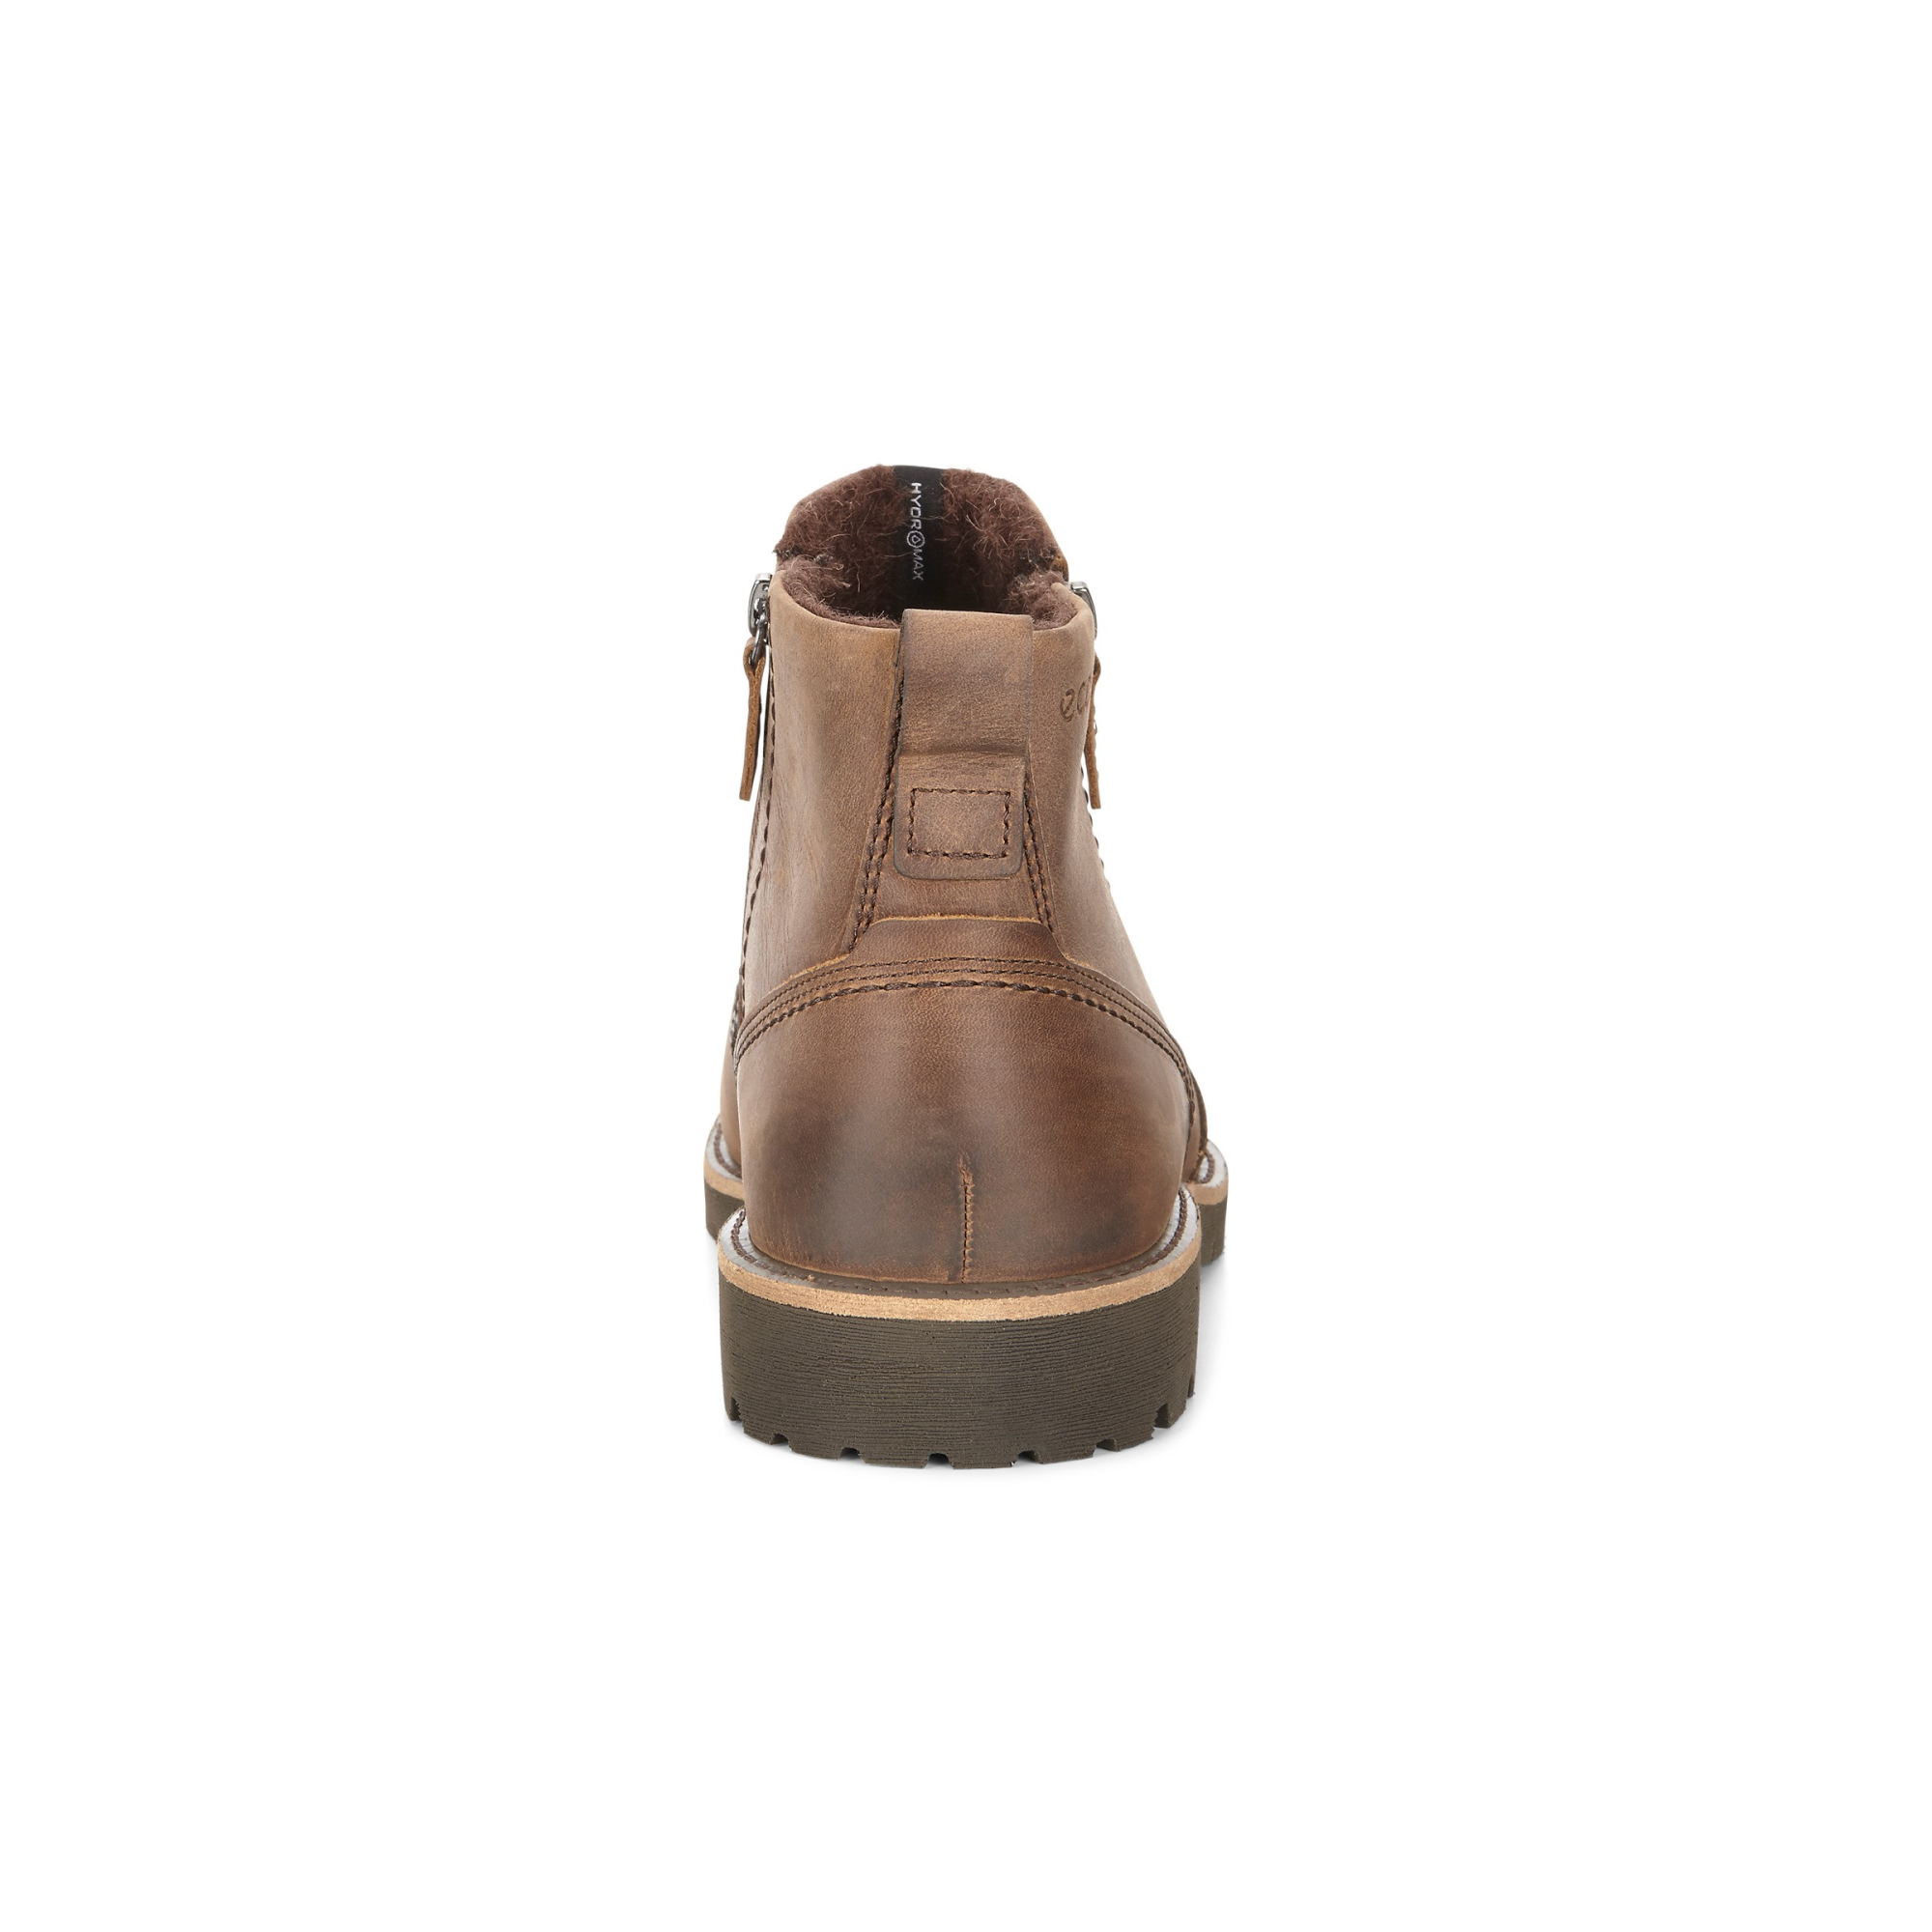 Ecco JAMESTOWN Ankle Boot 46 - Products - Veryk Mall - Mall, many quick response, safe your money!